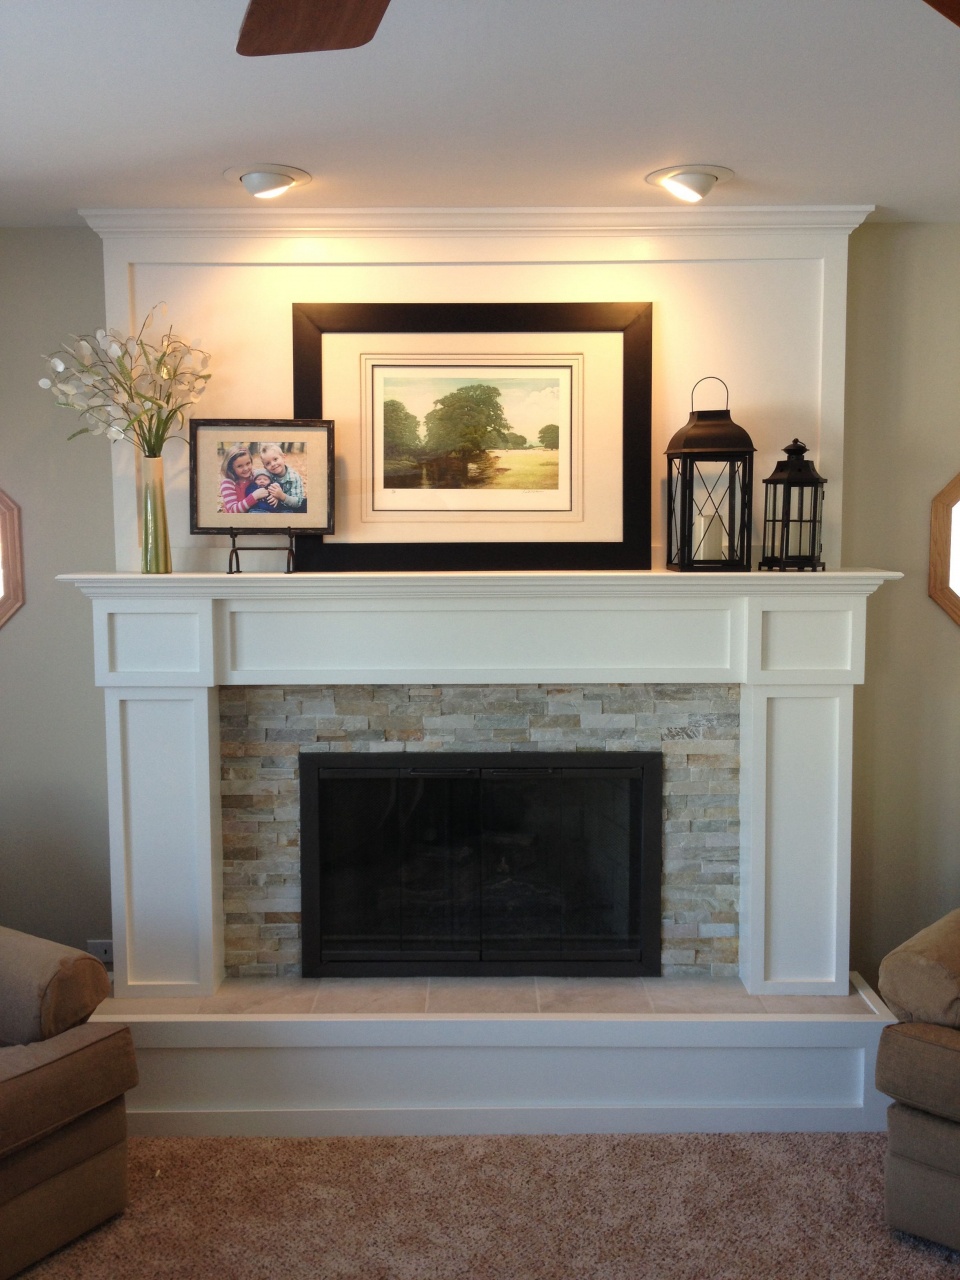 Diy Fireplace Surround Ideas Luxury How to Build A Fireplace Mantel From Scratch – Fireplace